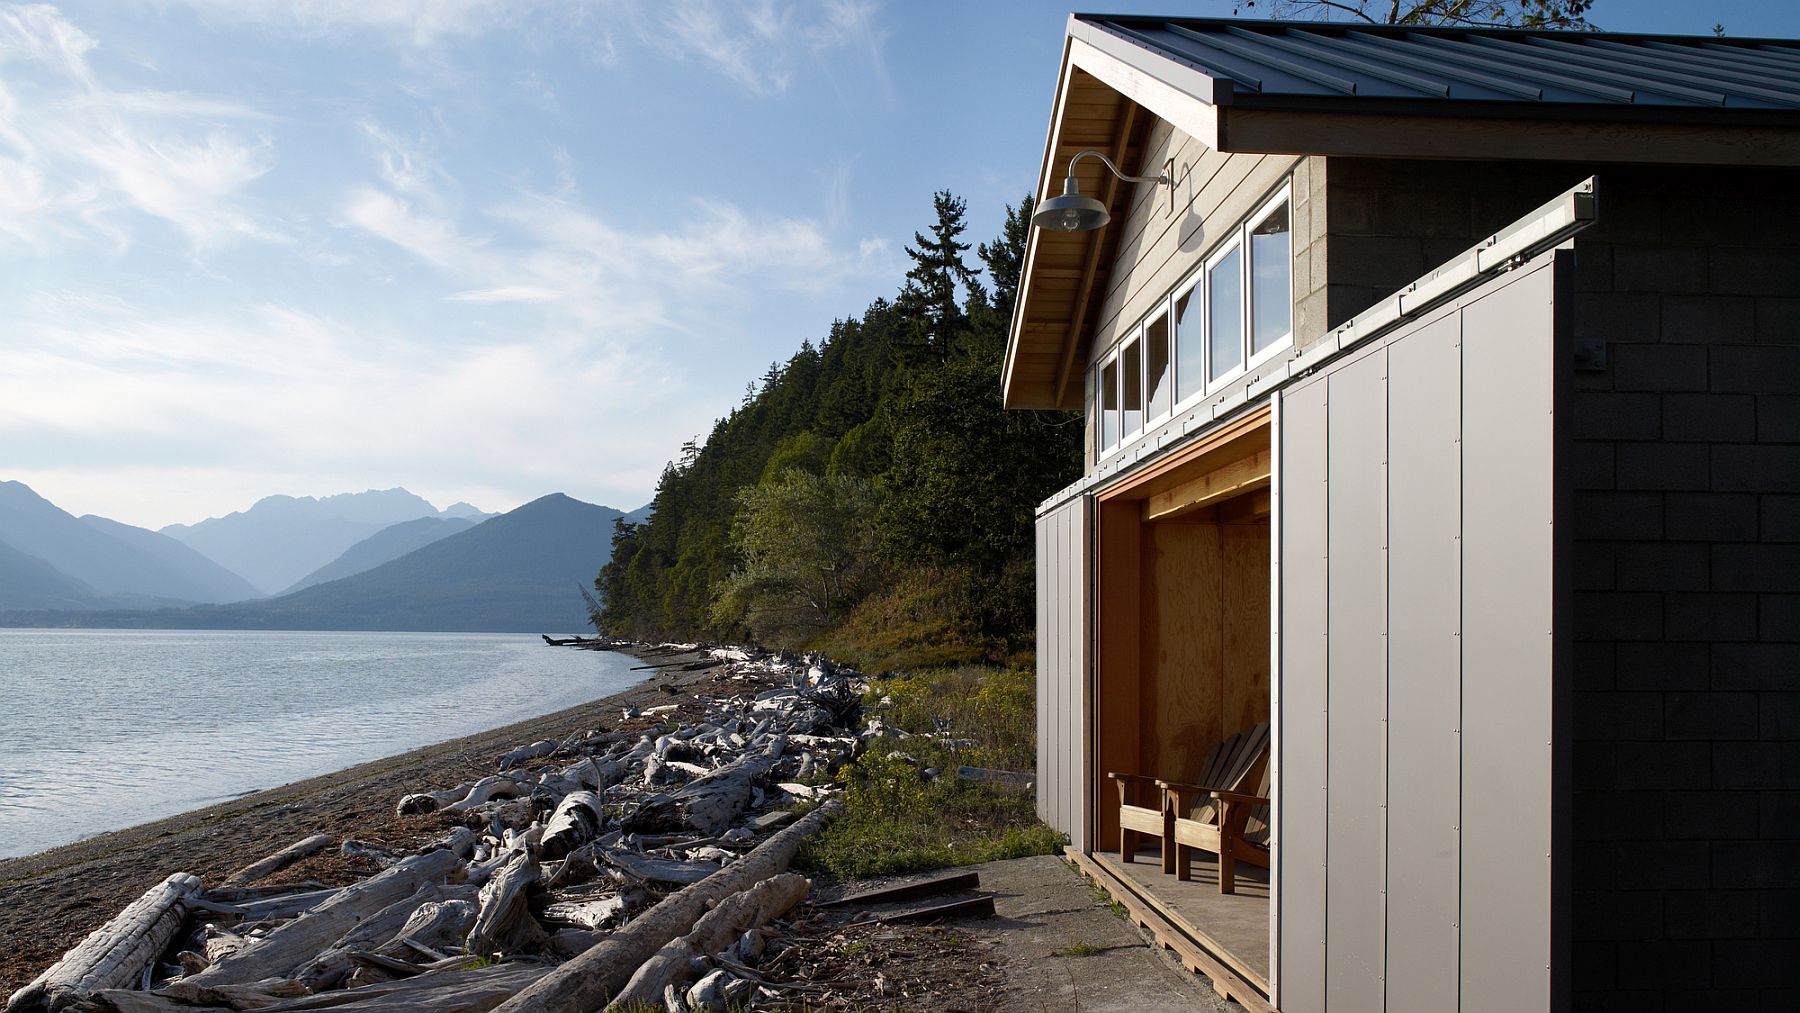 Exquisite views and amazing landscape at the Hood Canal Boat House